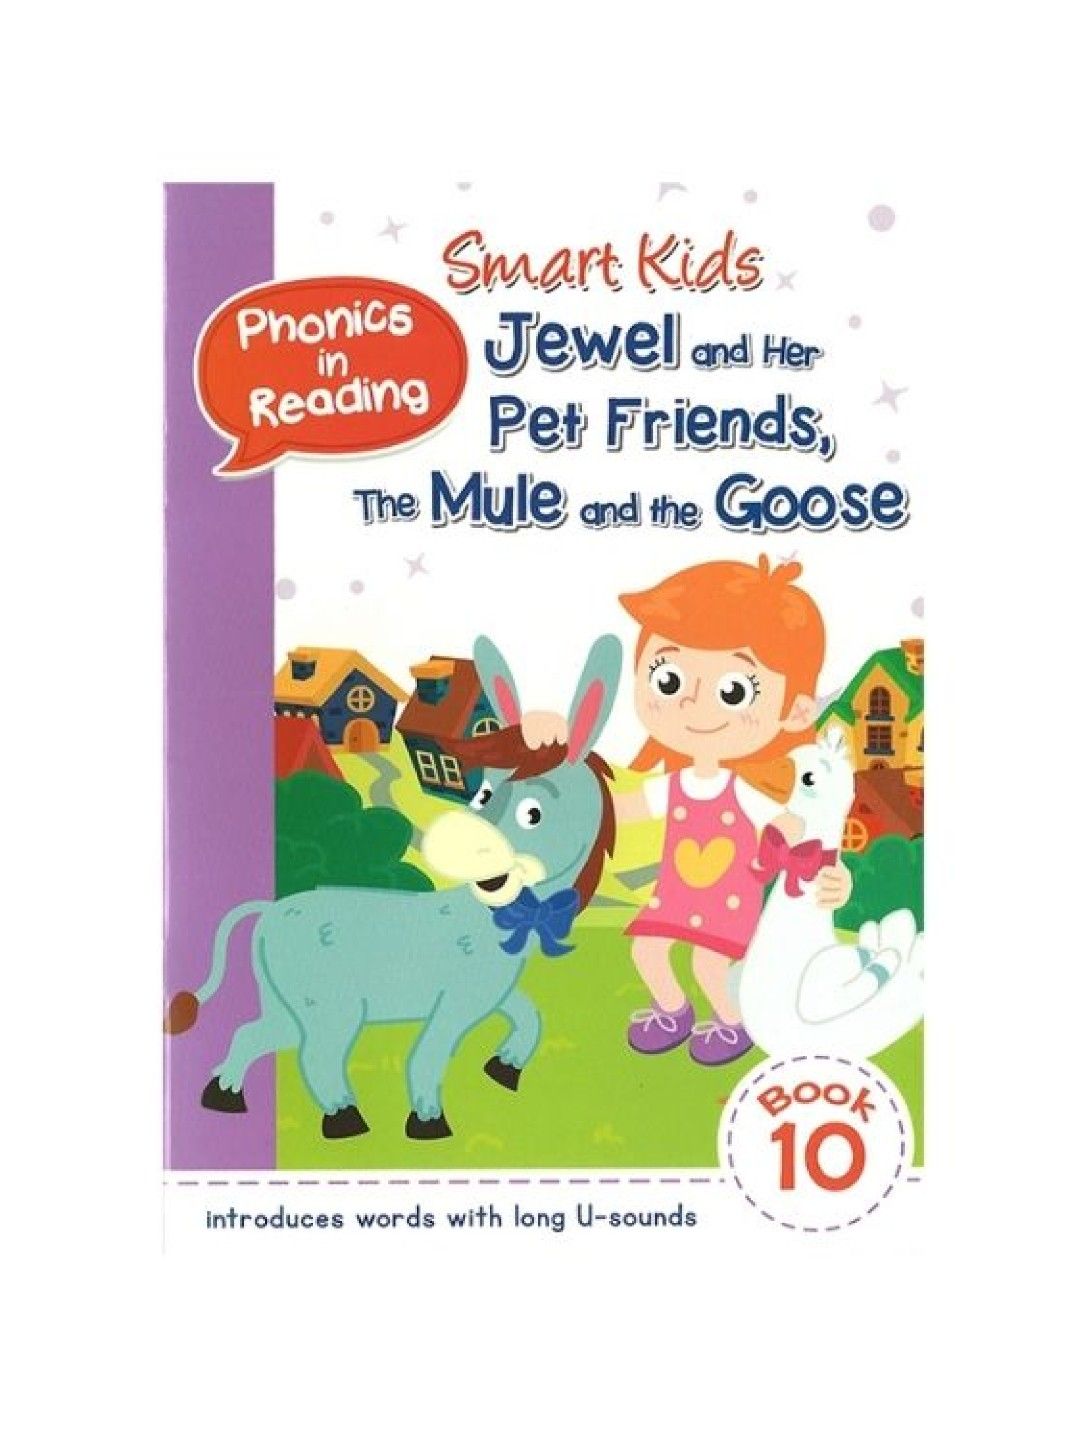 Learning is Fun Smart Kids Phonics In Reading Series 1 Book 10 - The Mule & The Goose